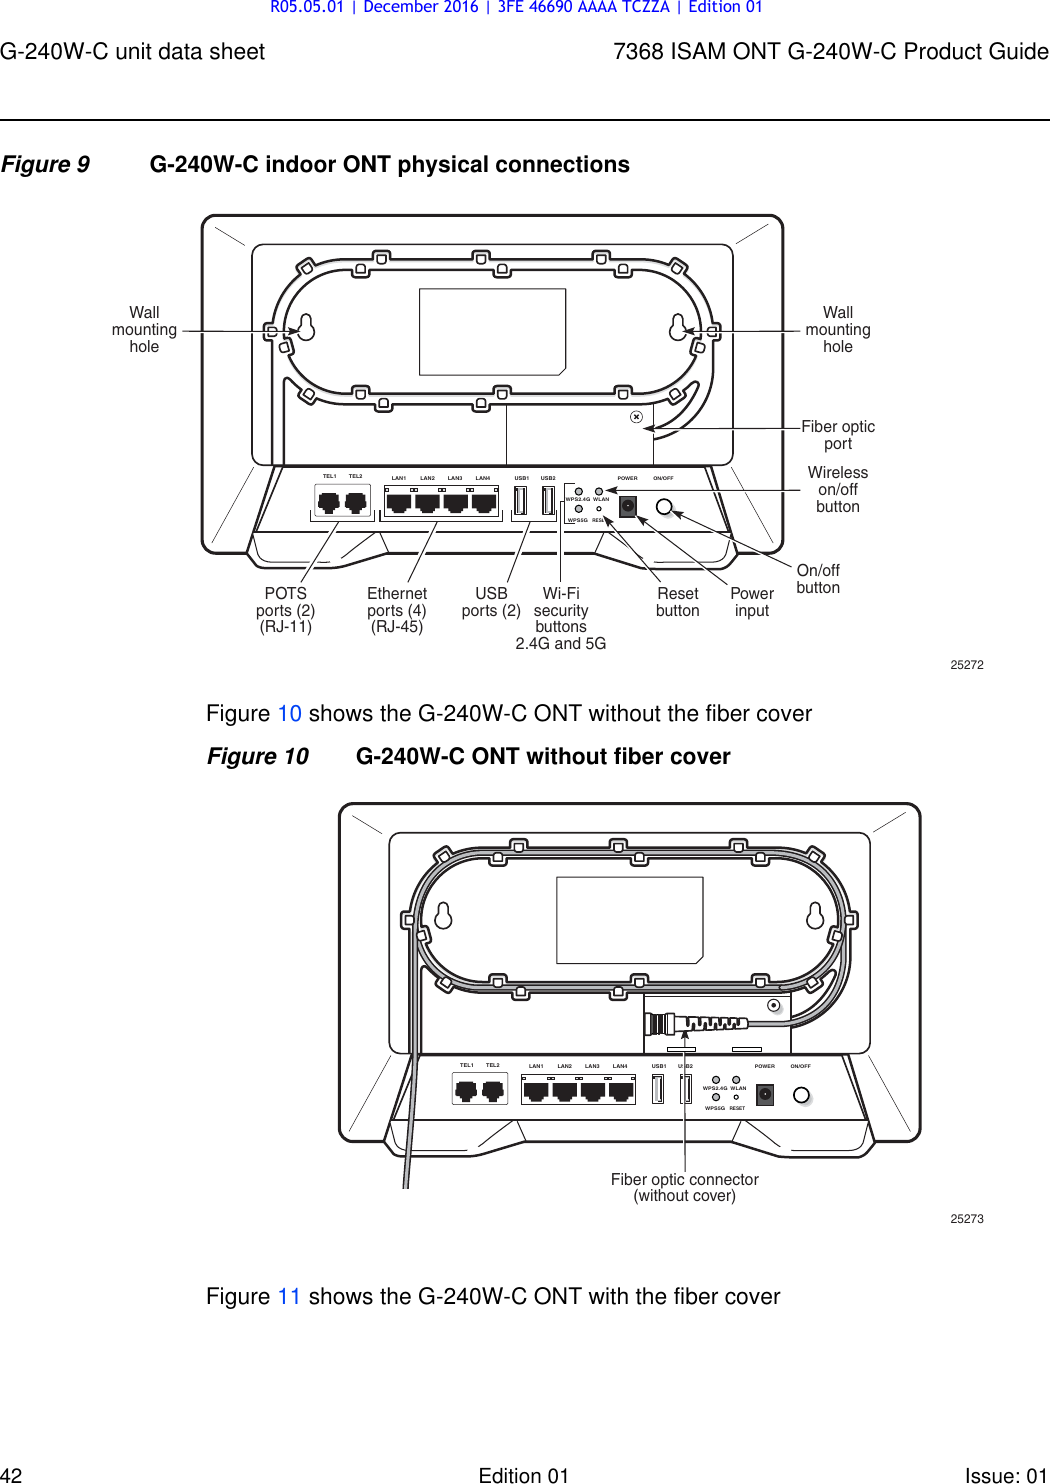 Page 42 of Nokia Bell G240W-C GPON ONU User Manual 7368 ISAM ONT G 240W B Product Guide